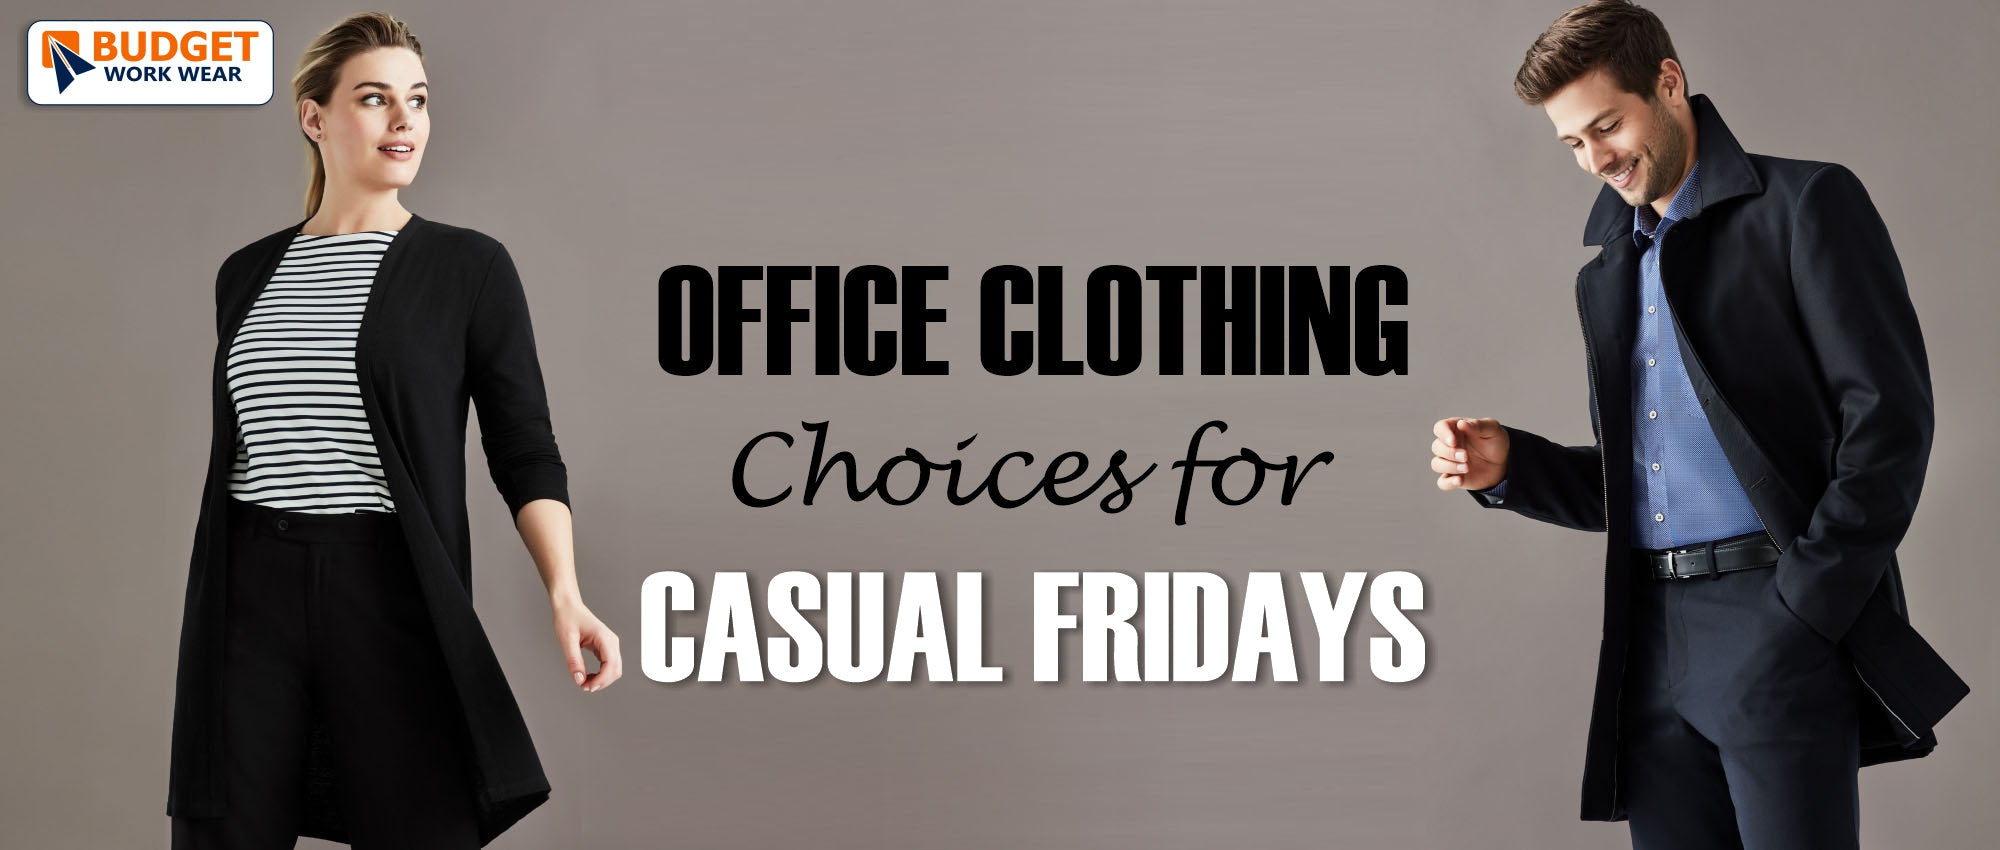 OFFICE CLOTHING CHOICES FOR CASUAL FRIDAYS – Budget Workwear